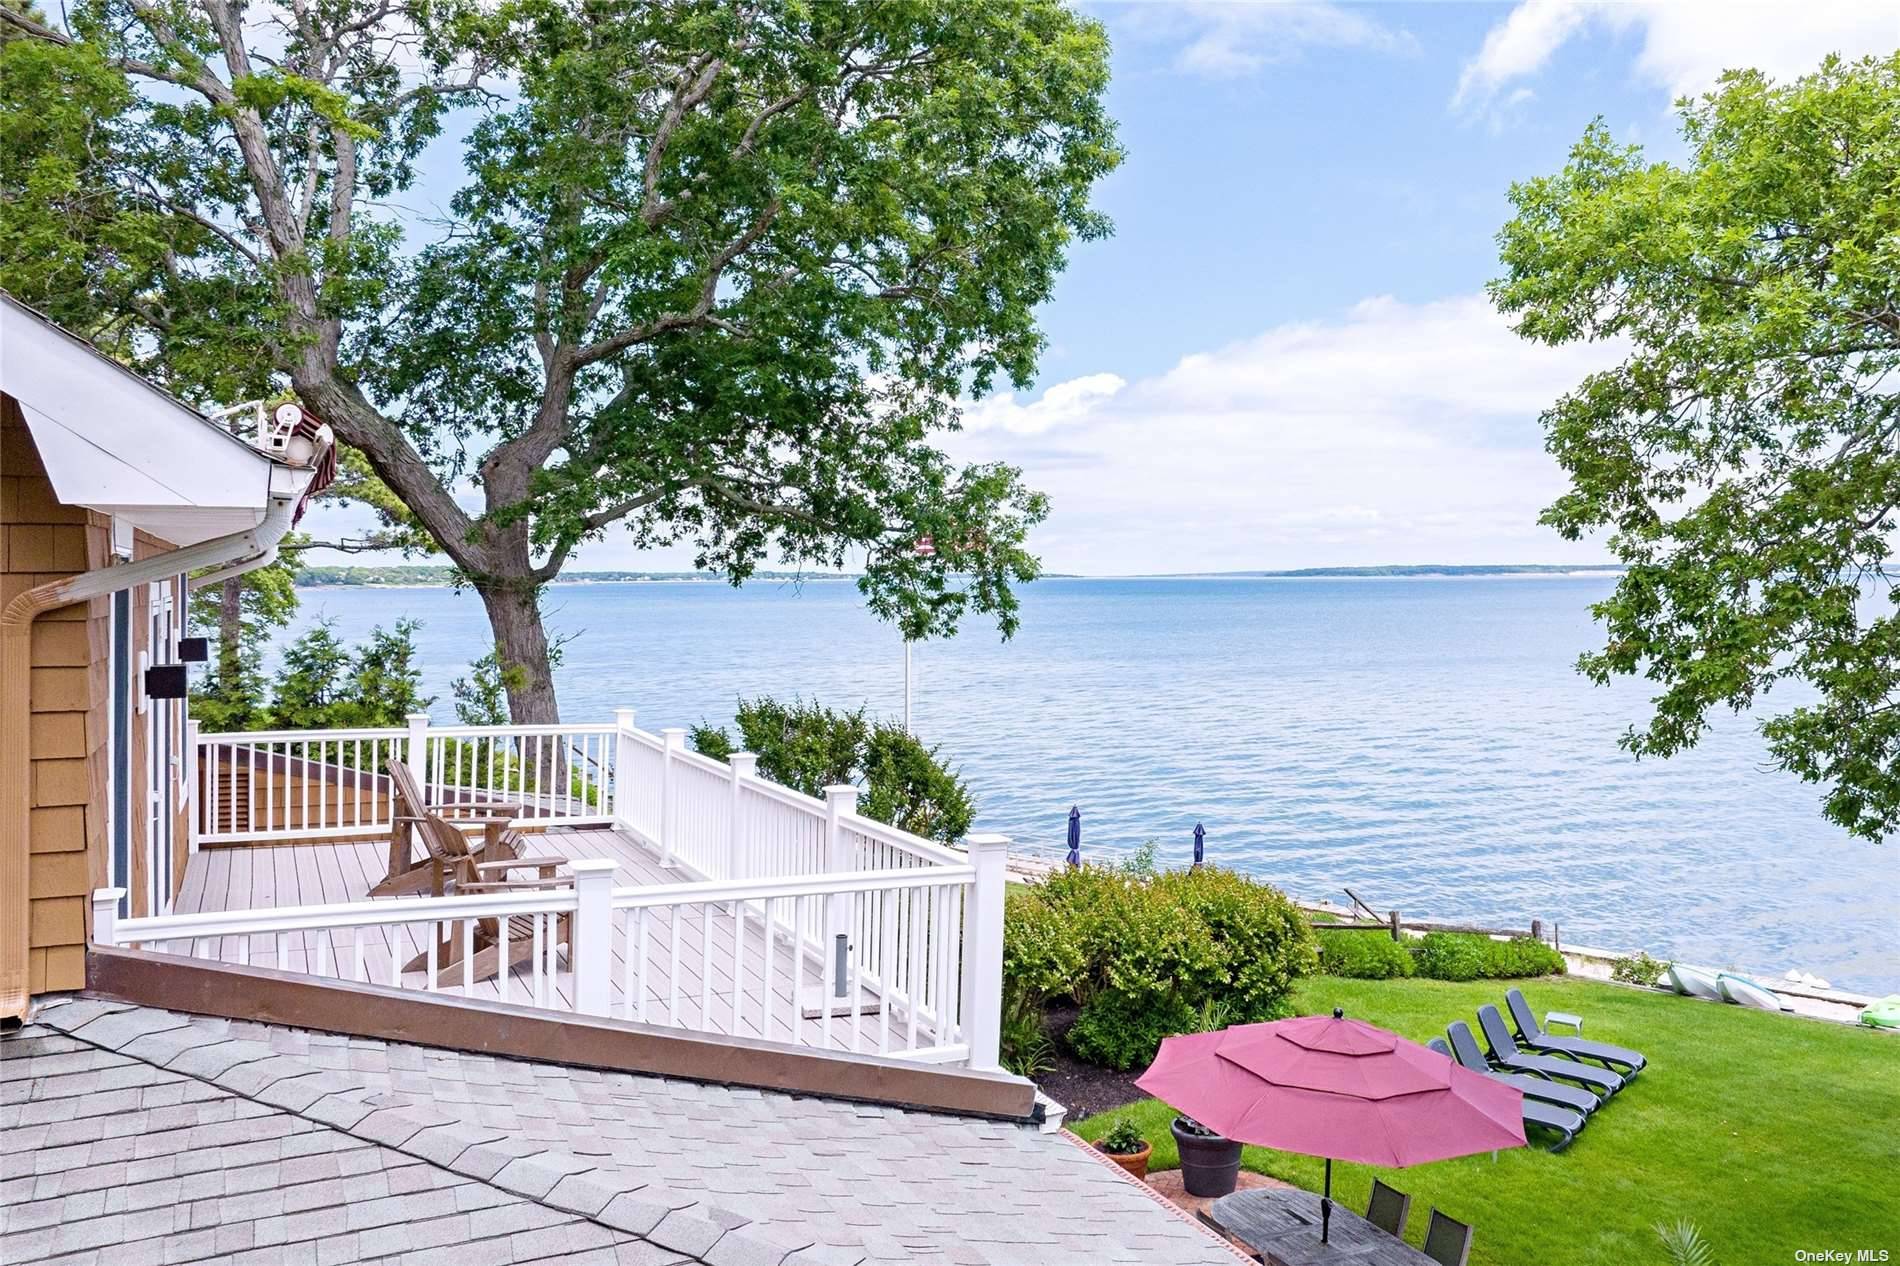 This lovingly restored 1902 shingle style beach house on the Peconic Bay is a great place to relax, and enjoy the beauty of the North Fork.